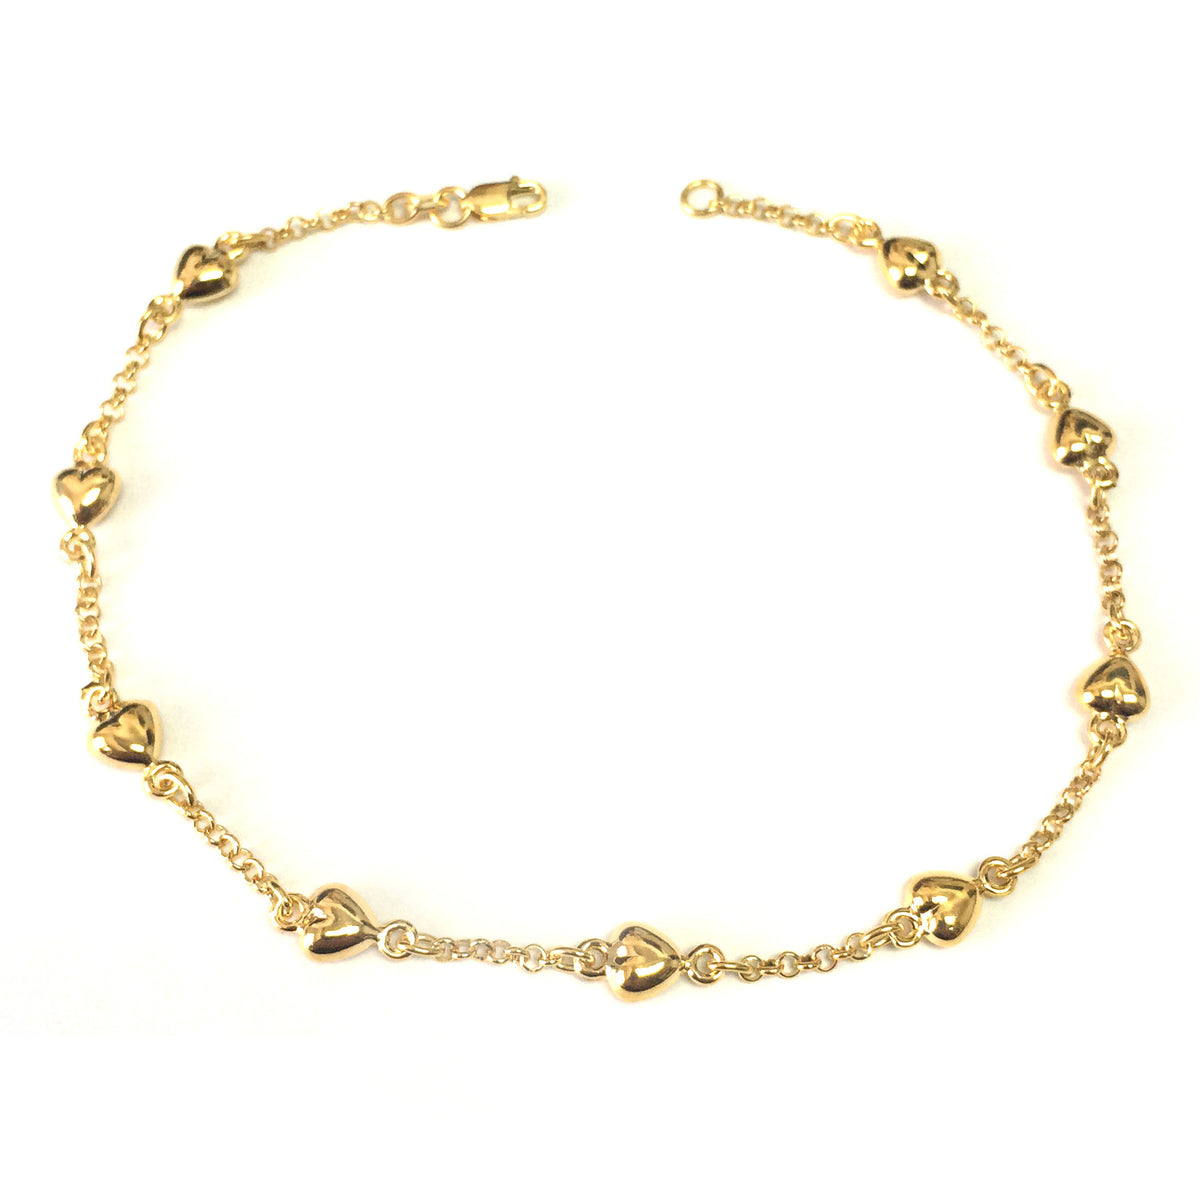 14K Yellow Gold Puffed Hearts Anklet, 10"